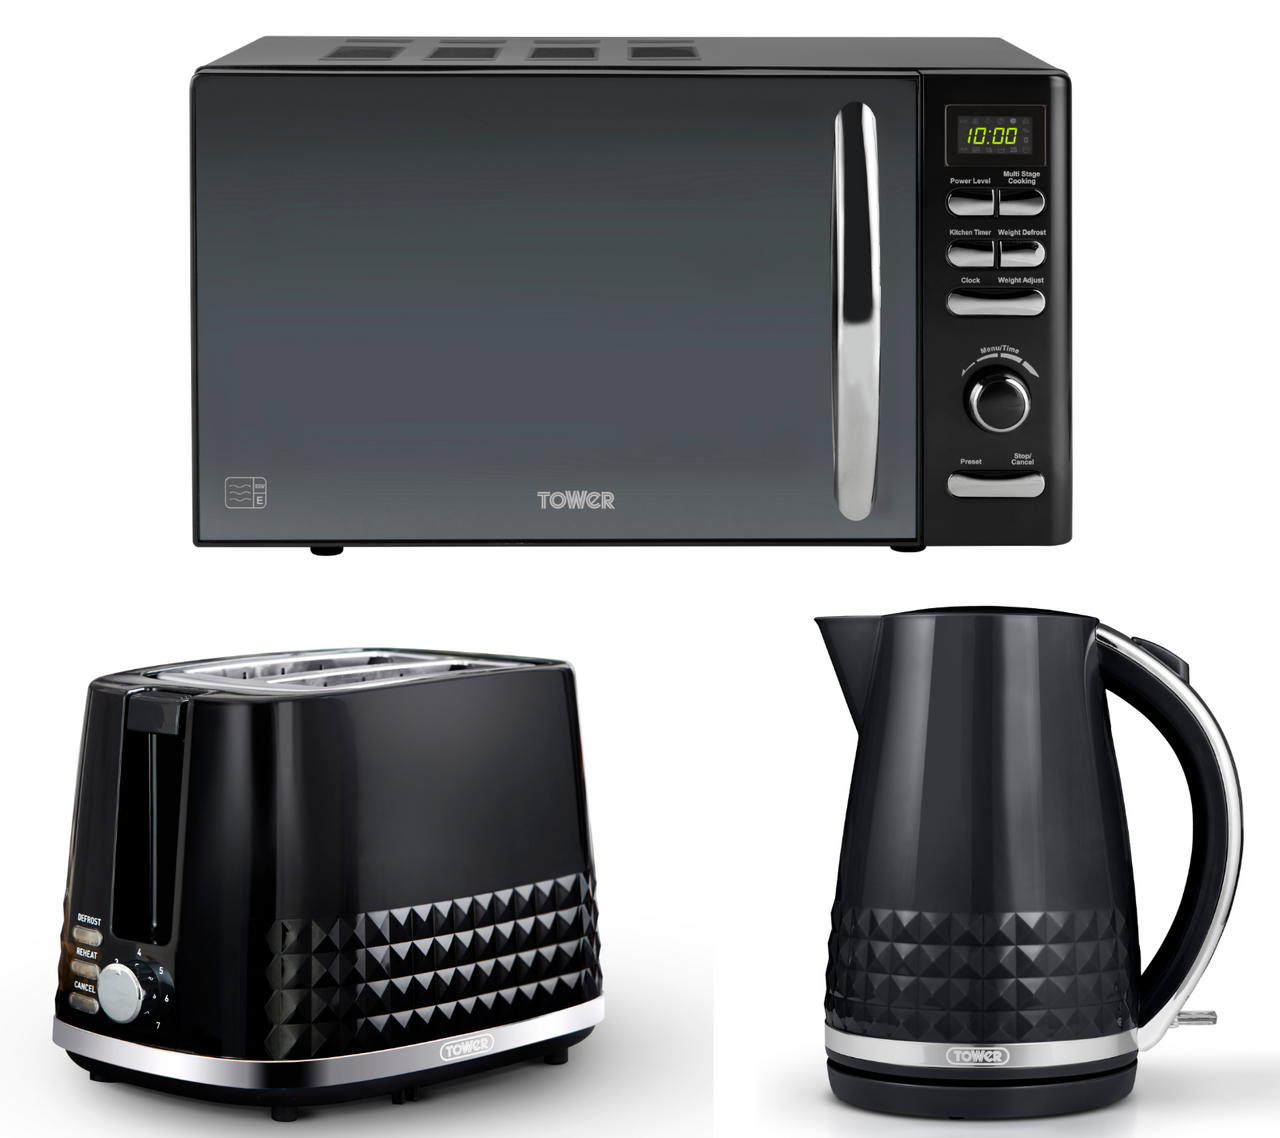 Tower Solitaire Black 1.5L 3KW Kettle, 2 Slice Toaster & T24019 Infinity Digital Microwave Matching Set